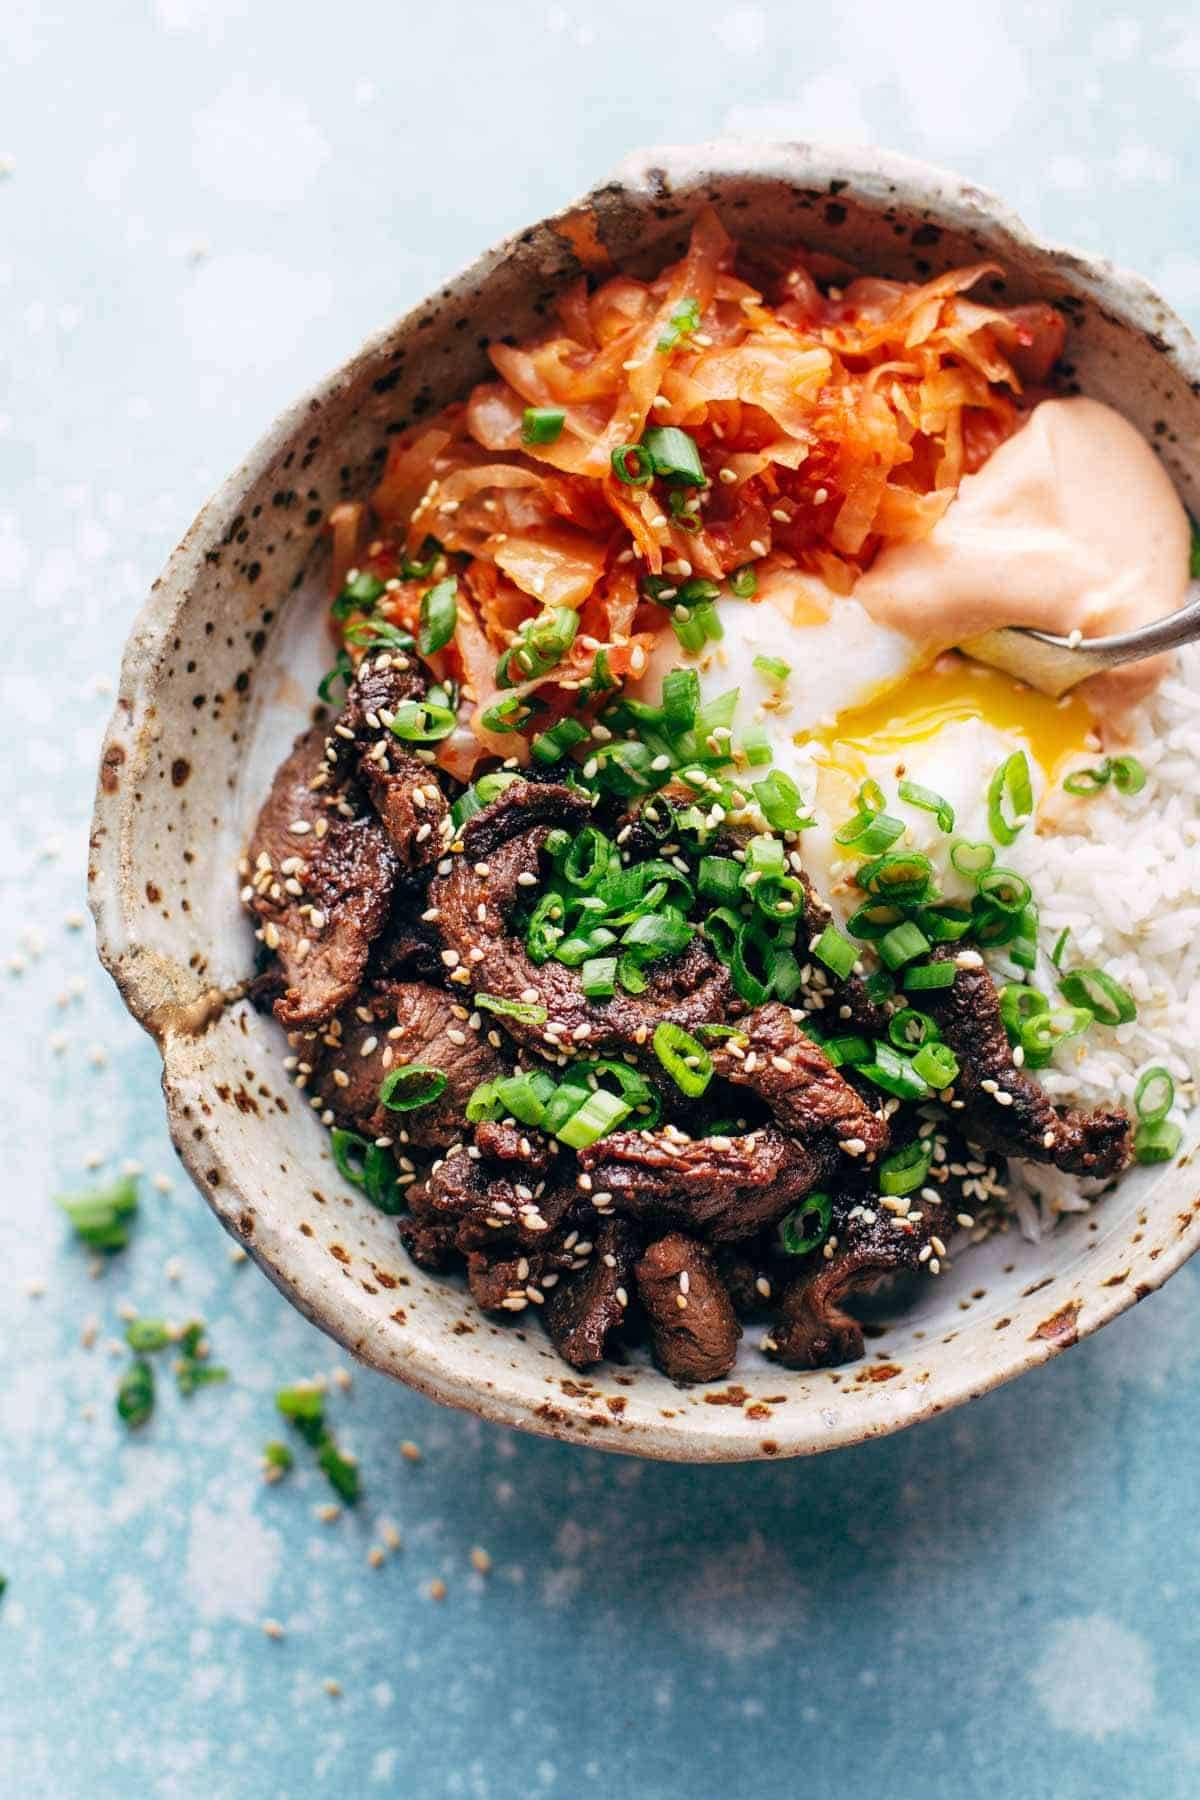 Bowl with rice and steak.